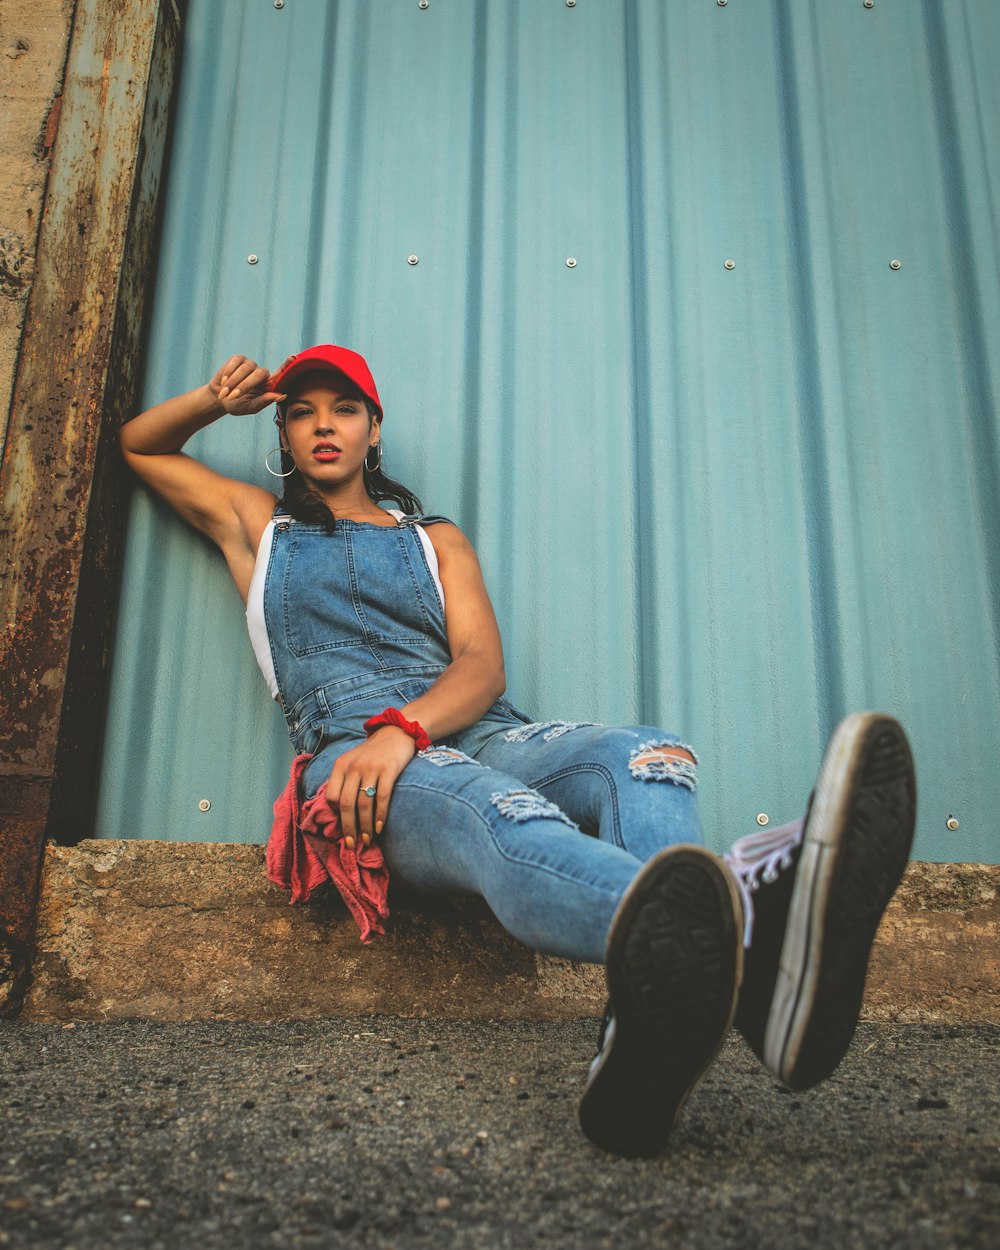 a man in overalls and a red hat sitting against a blue wall